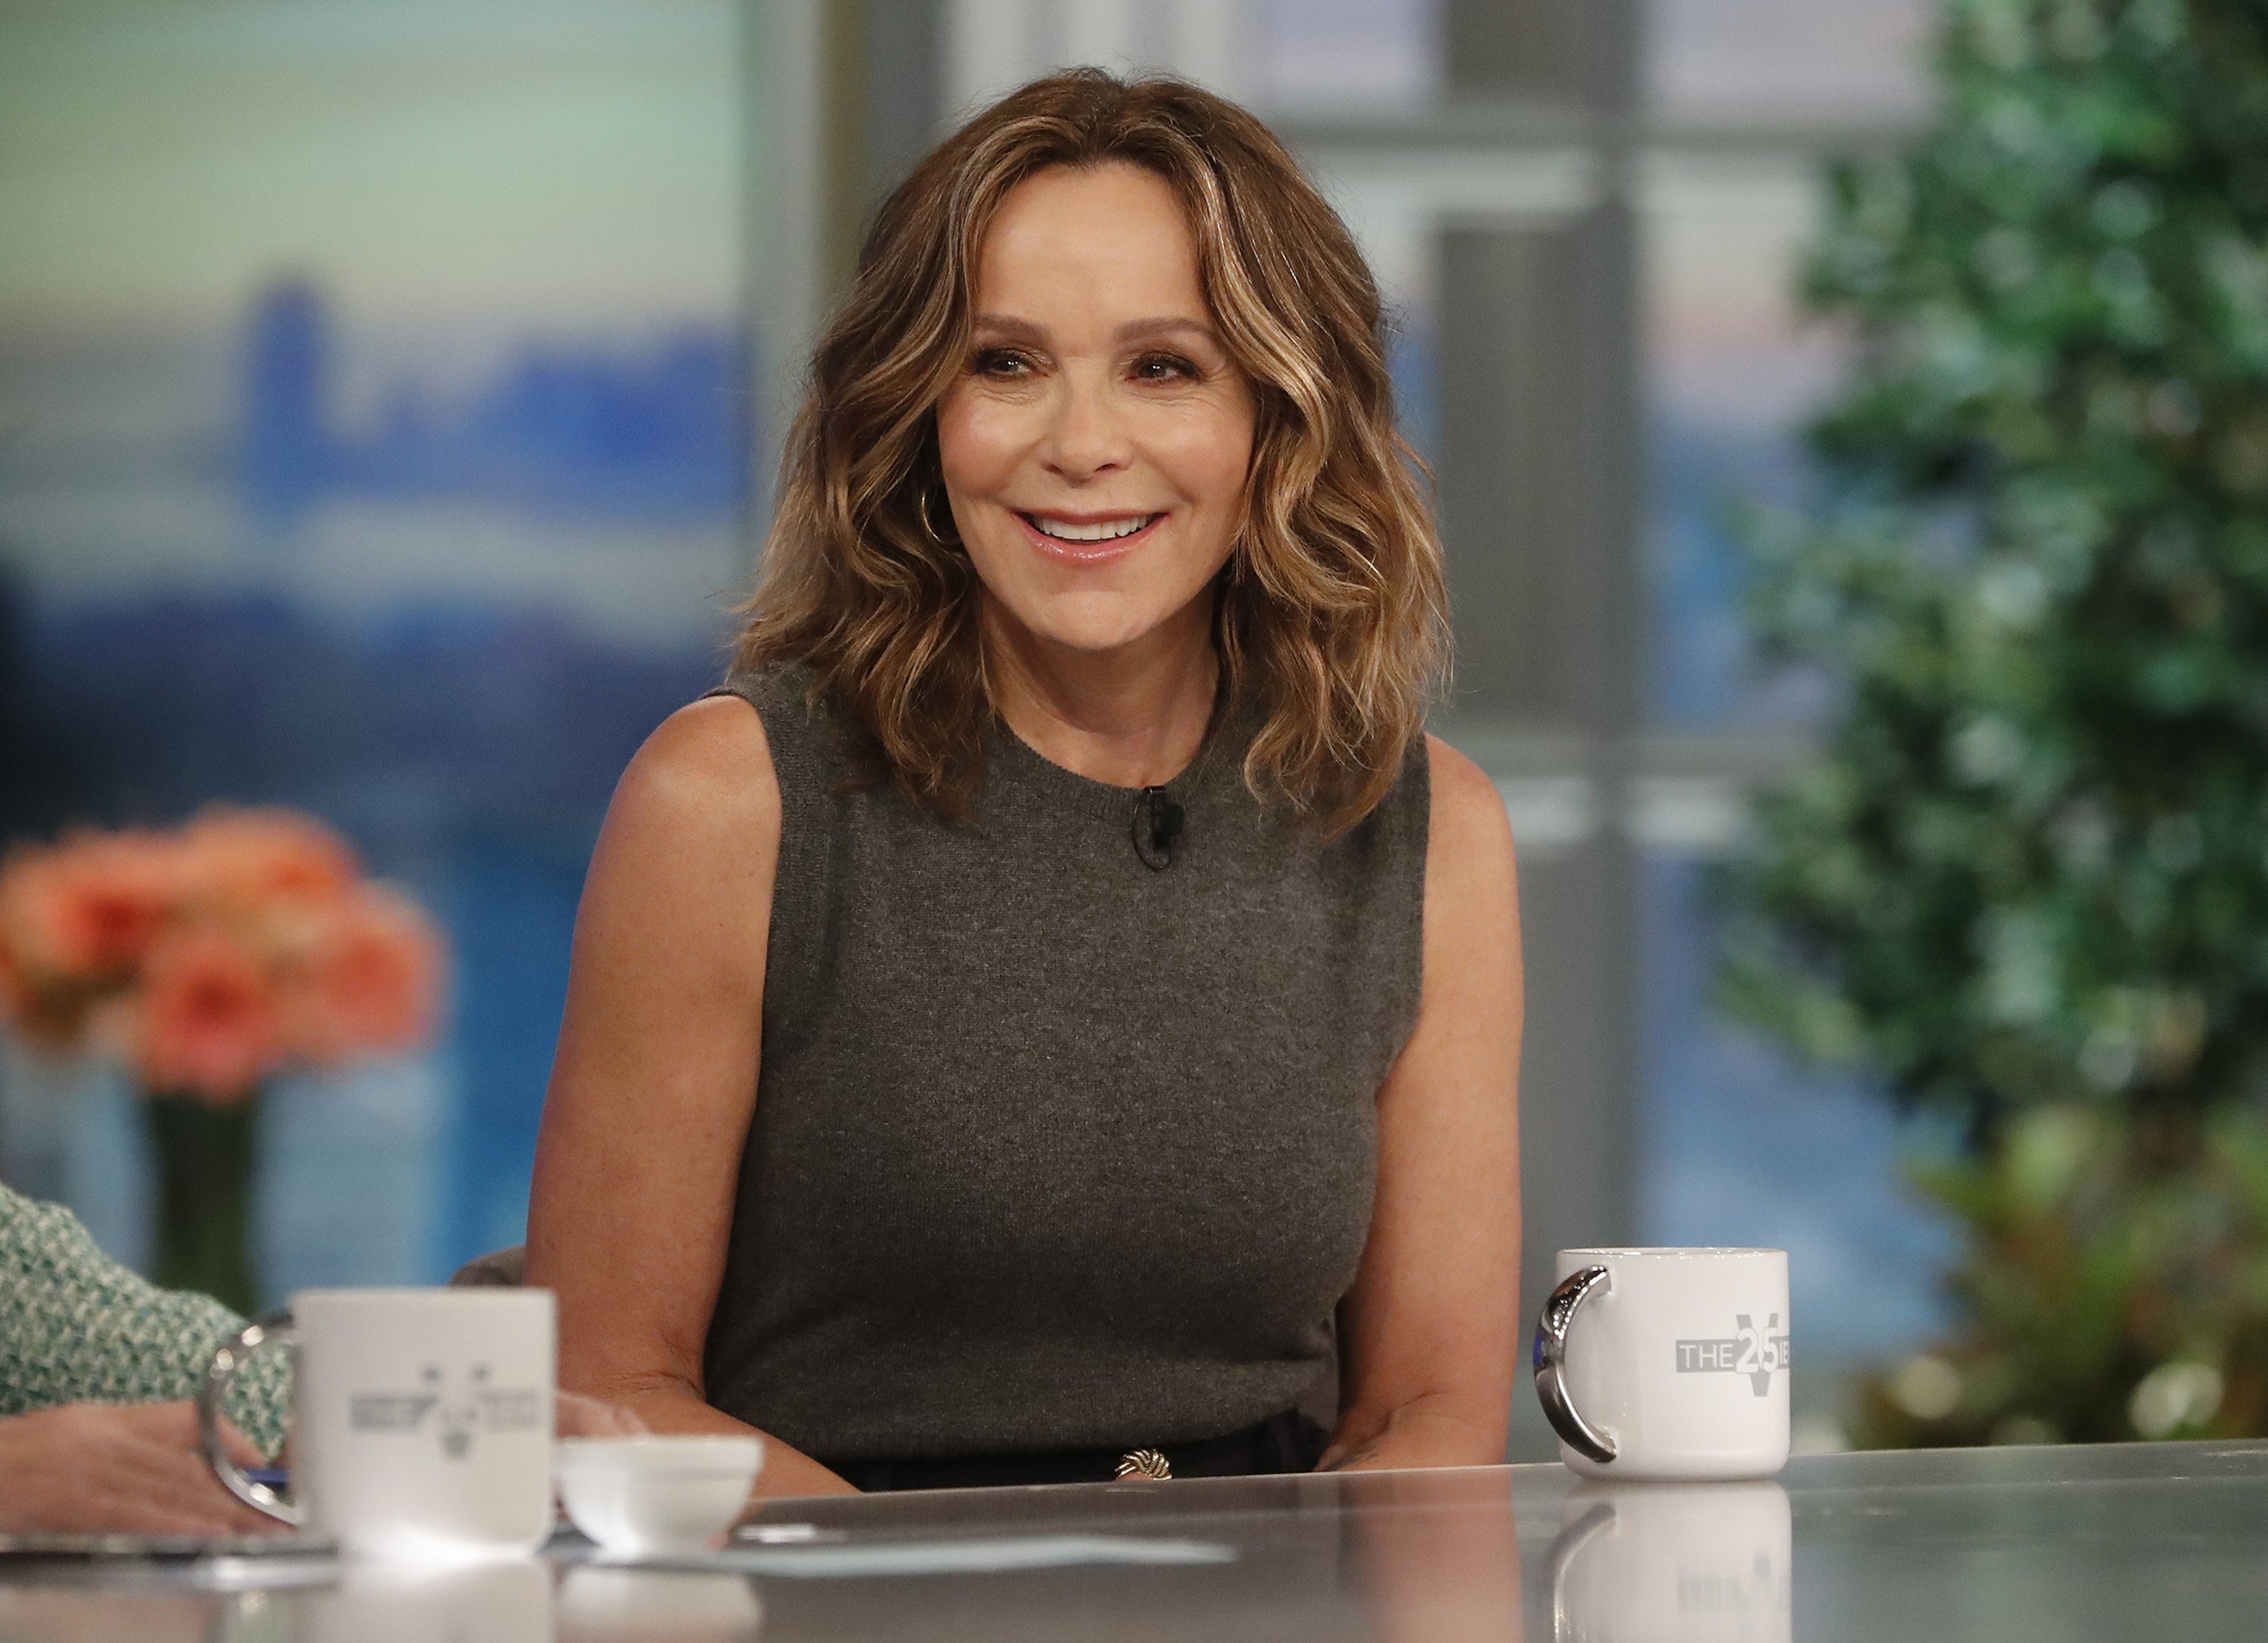 Lindsey Granger, guest co-hosts, and Jennifer Grey and Bad Bunny are guests on The View on Tuesday, May 3, 2021. | Source: Getty Images